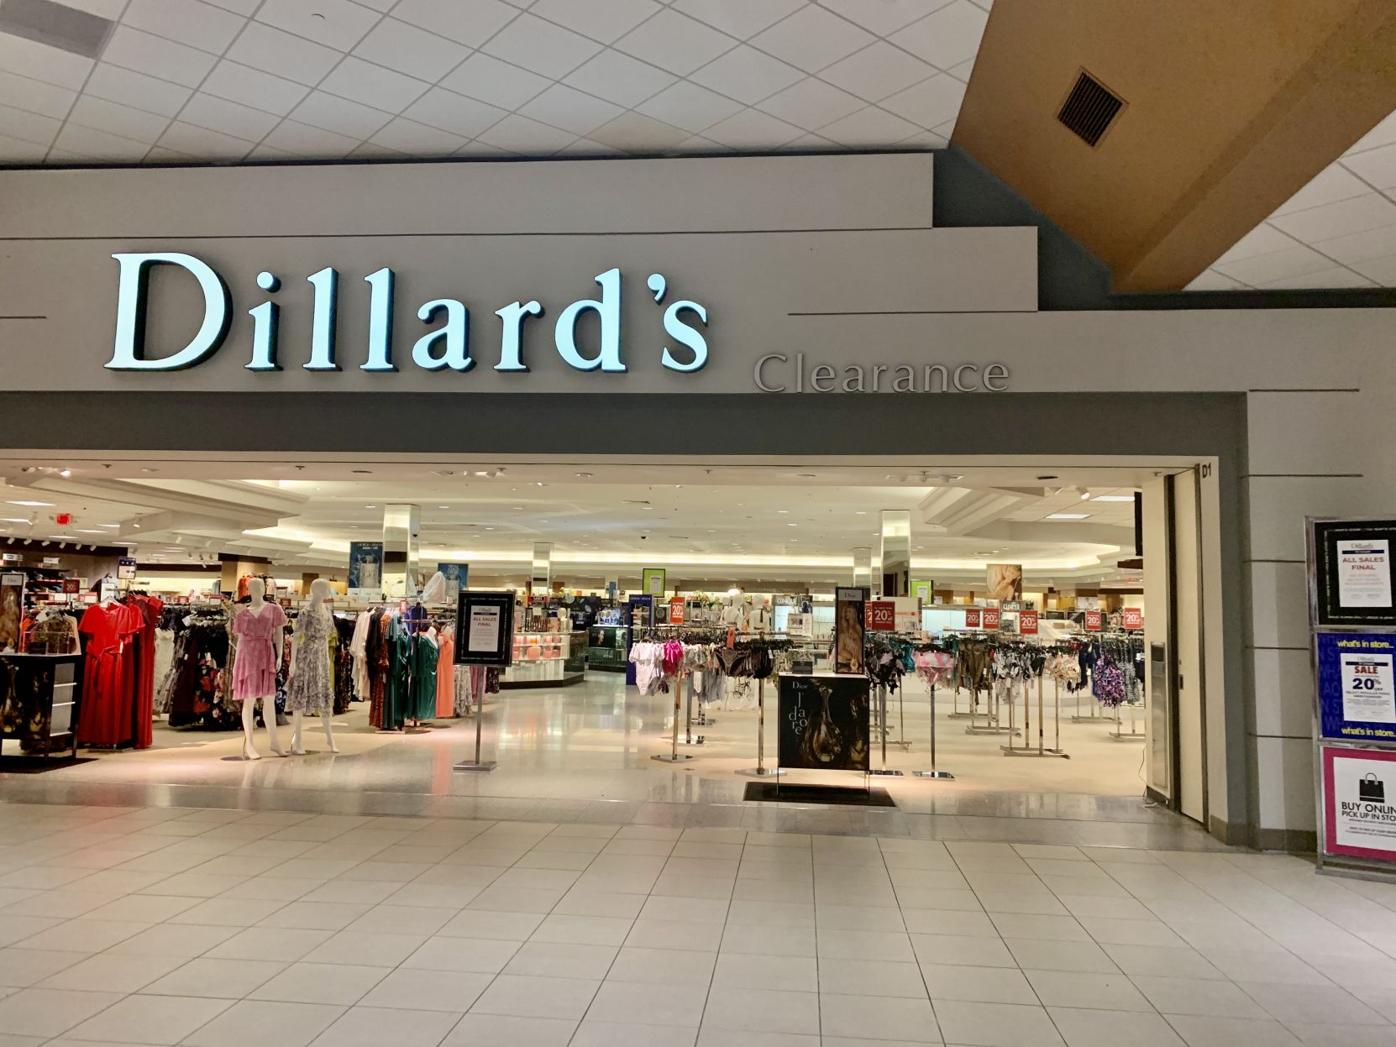 Local Dillard's becomes clearance store, Local News